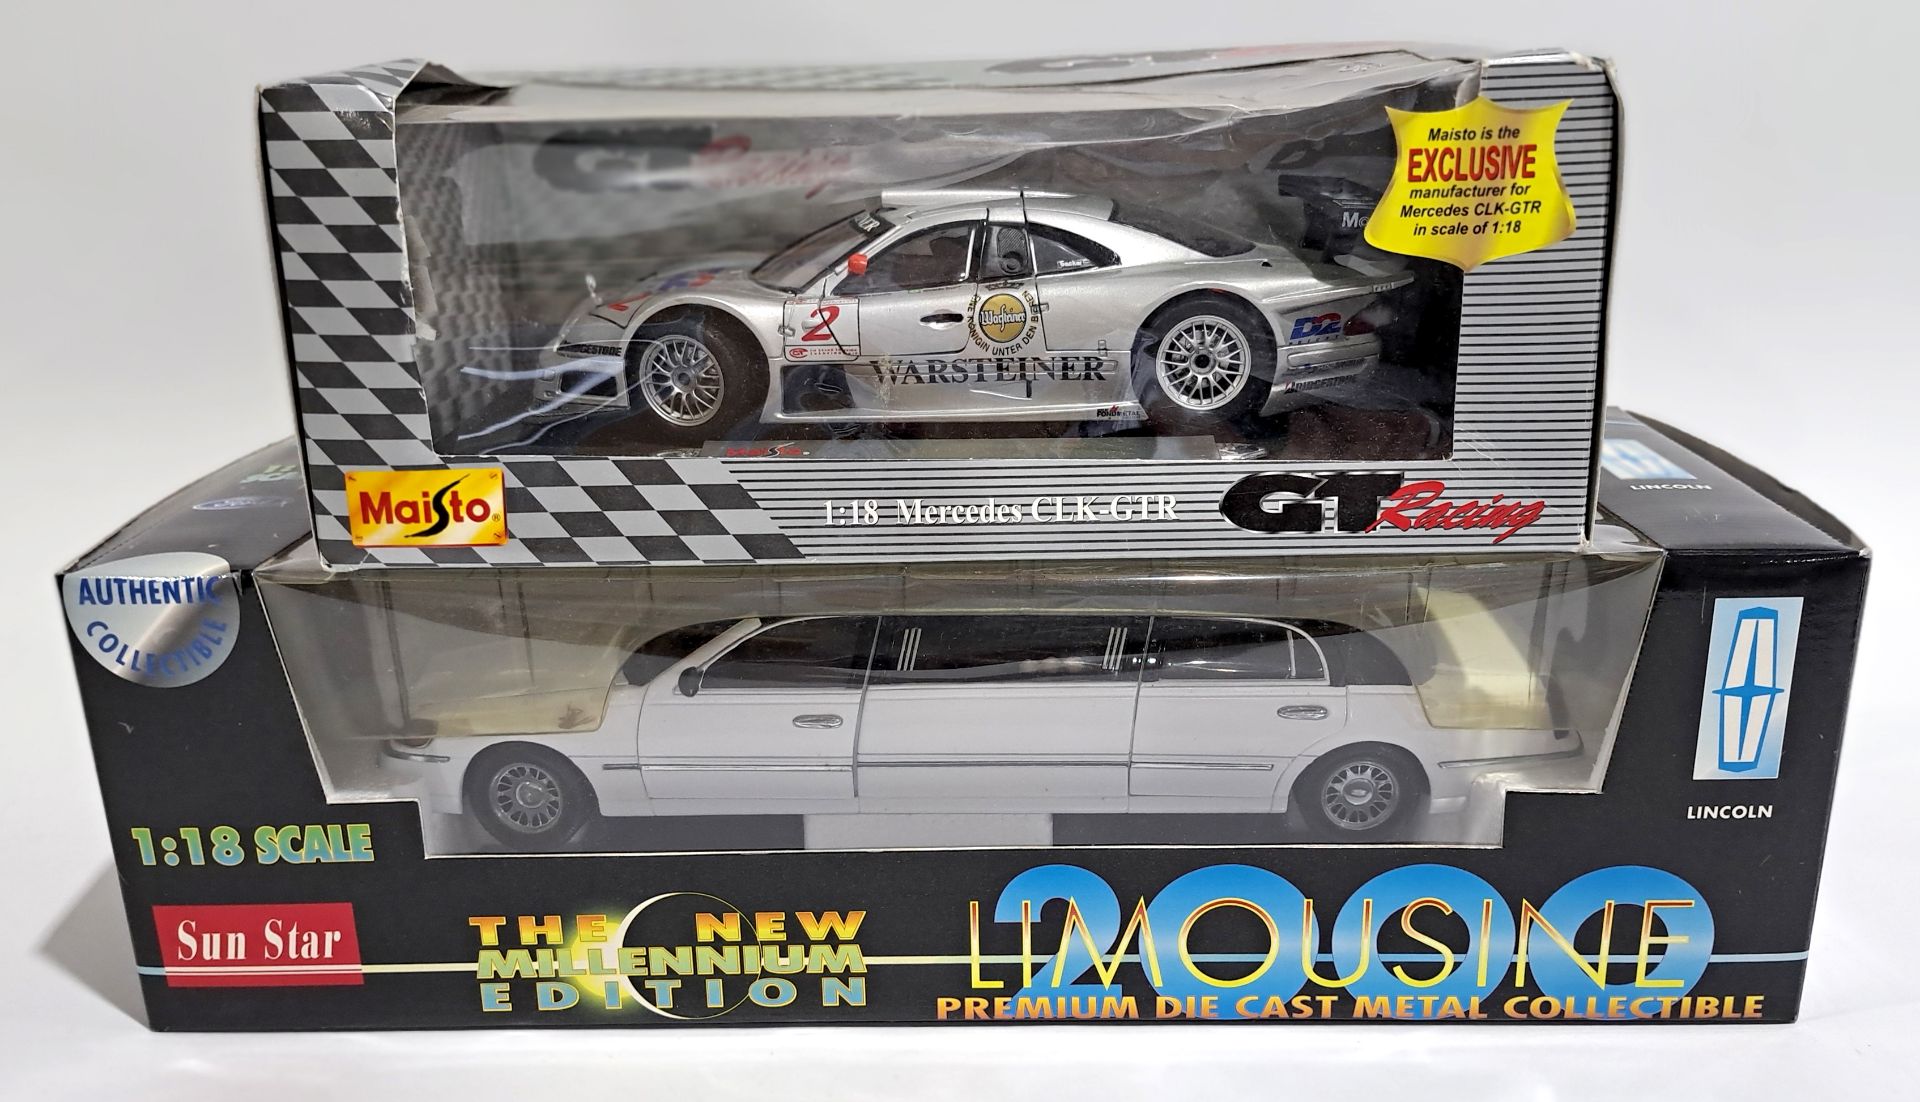 A boxed pair of 1:18 scale diecast models